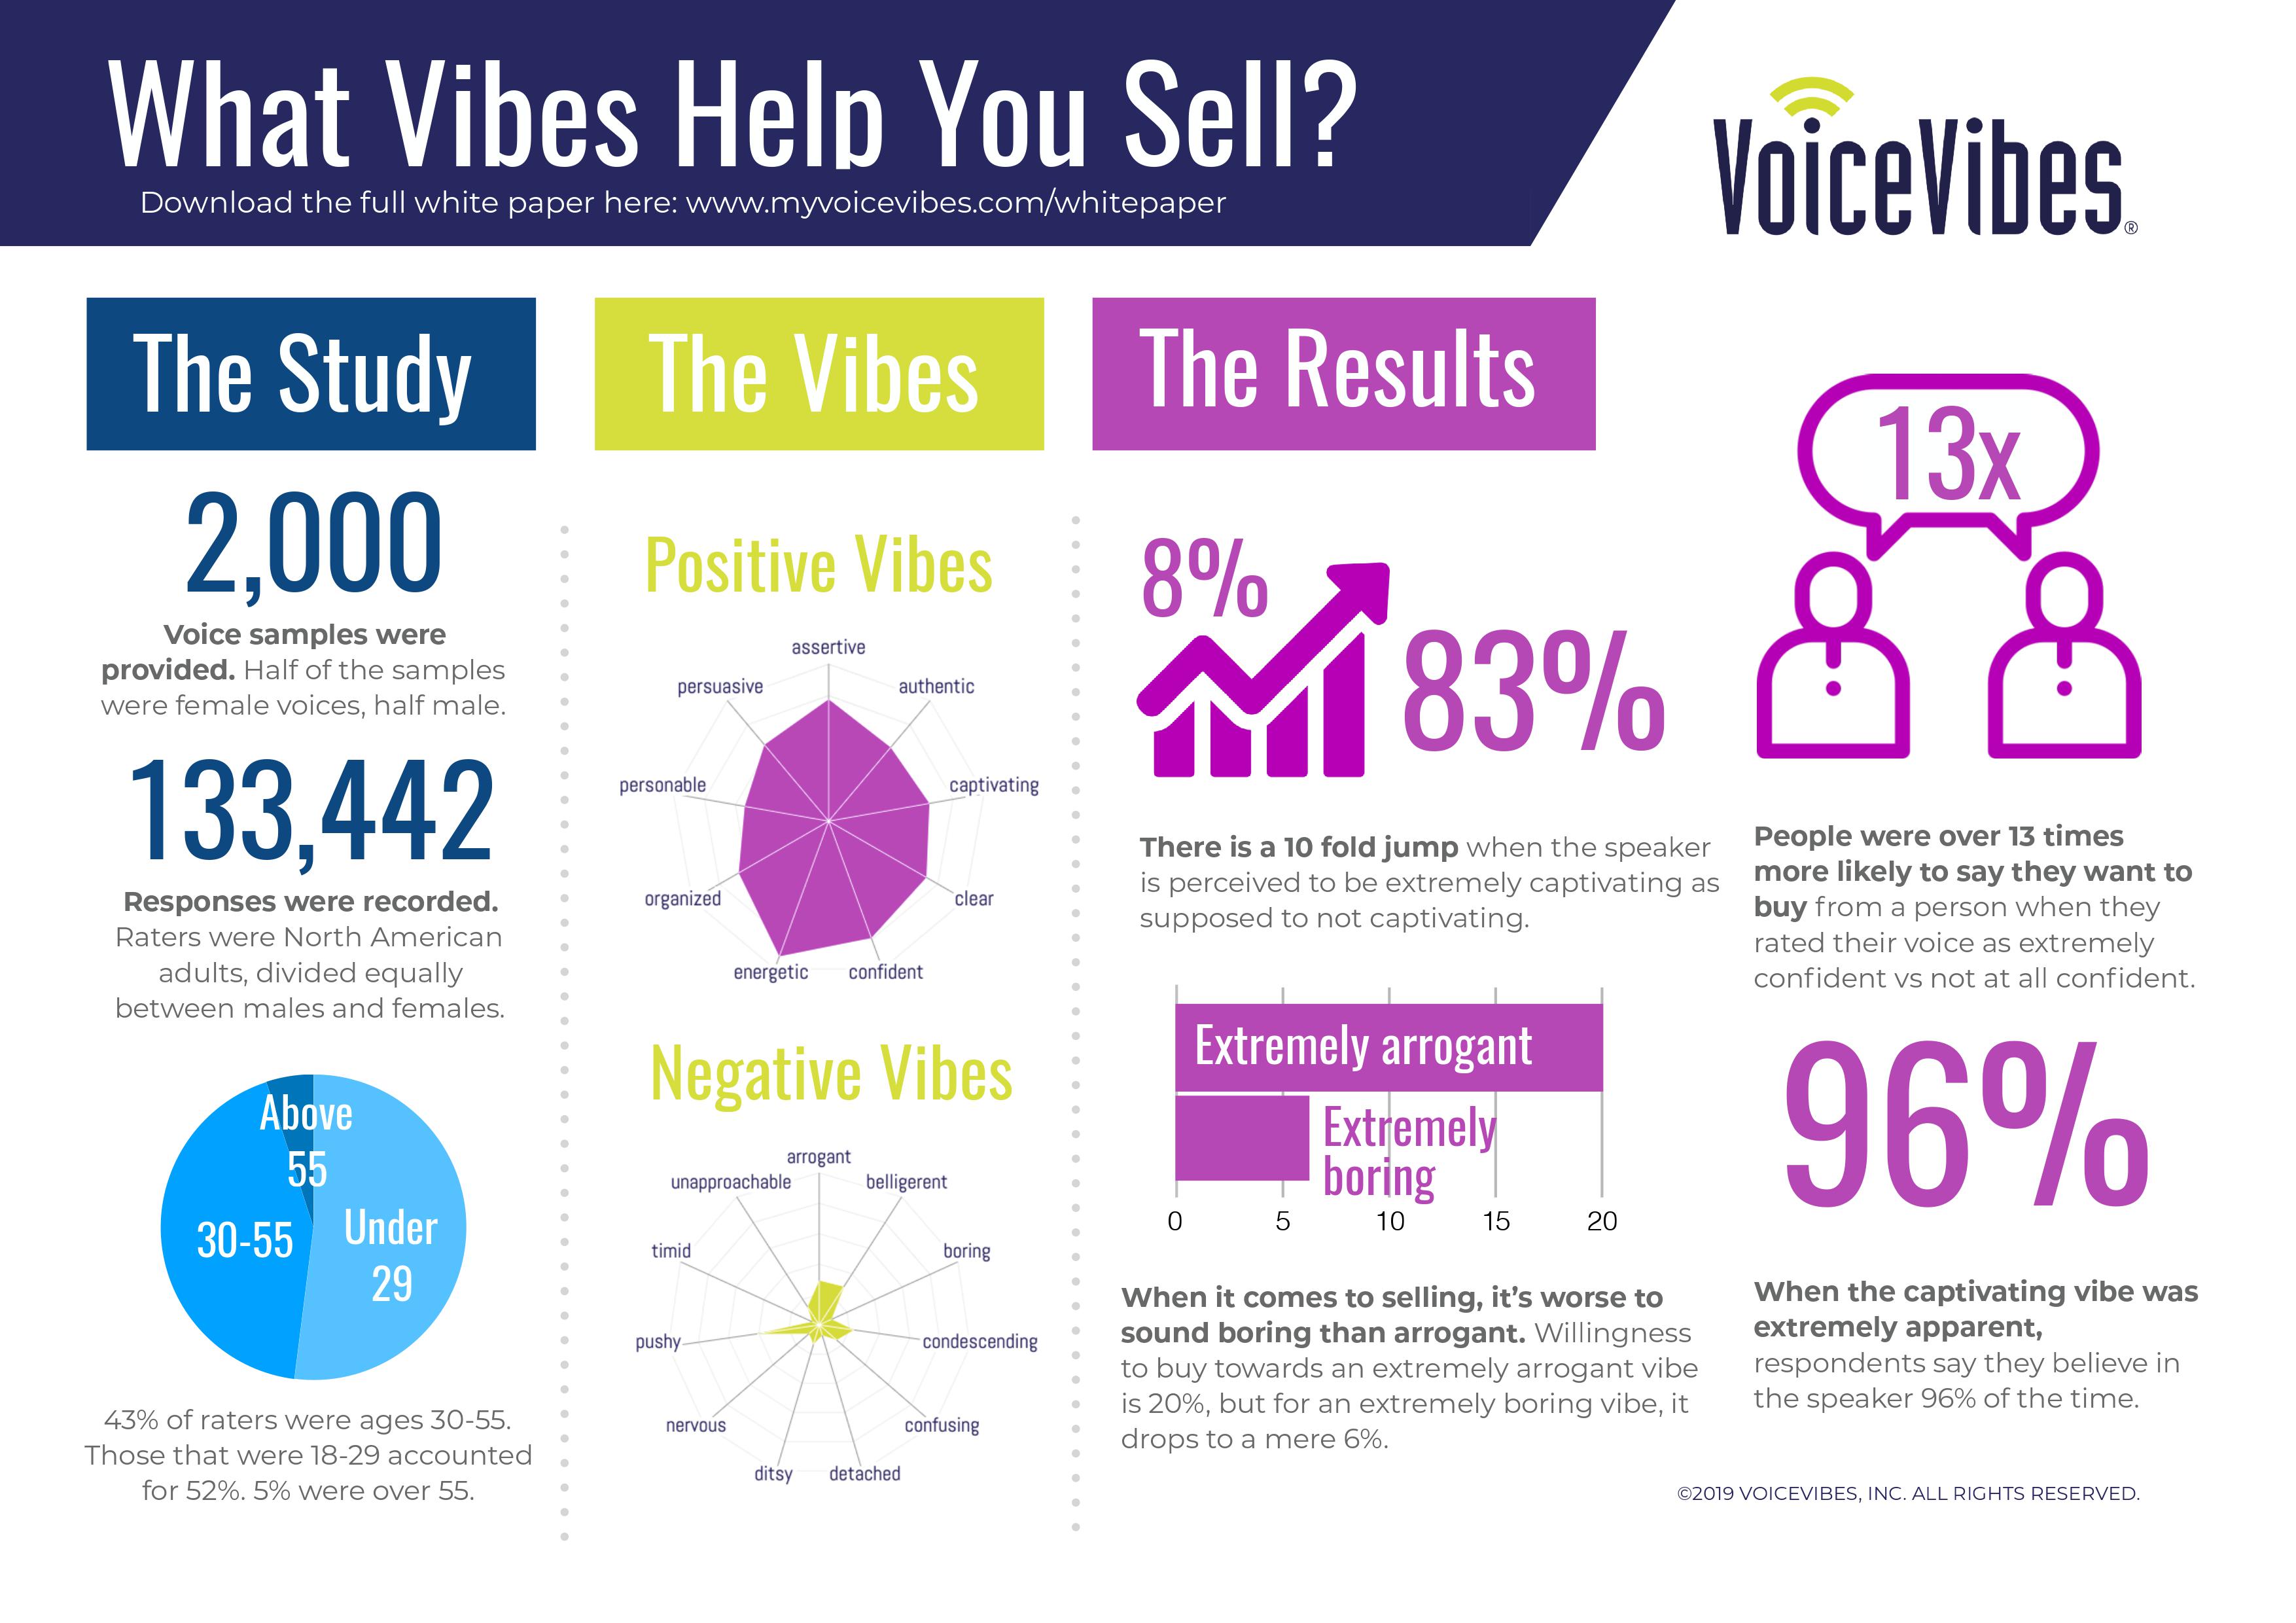 VoiceVibes announces research findings that indicate the connection between voice characteristics (vibes) and sales.